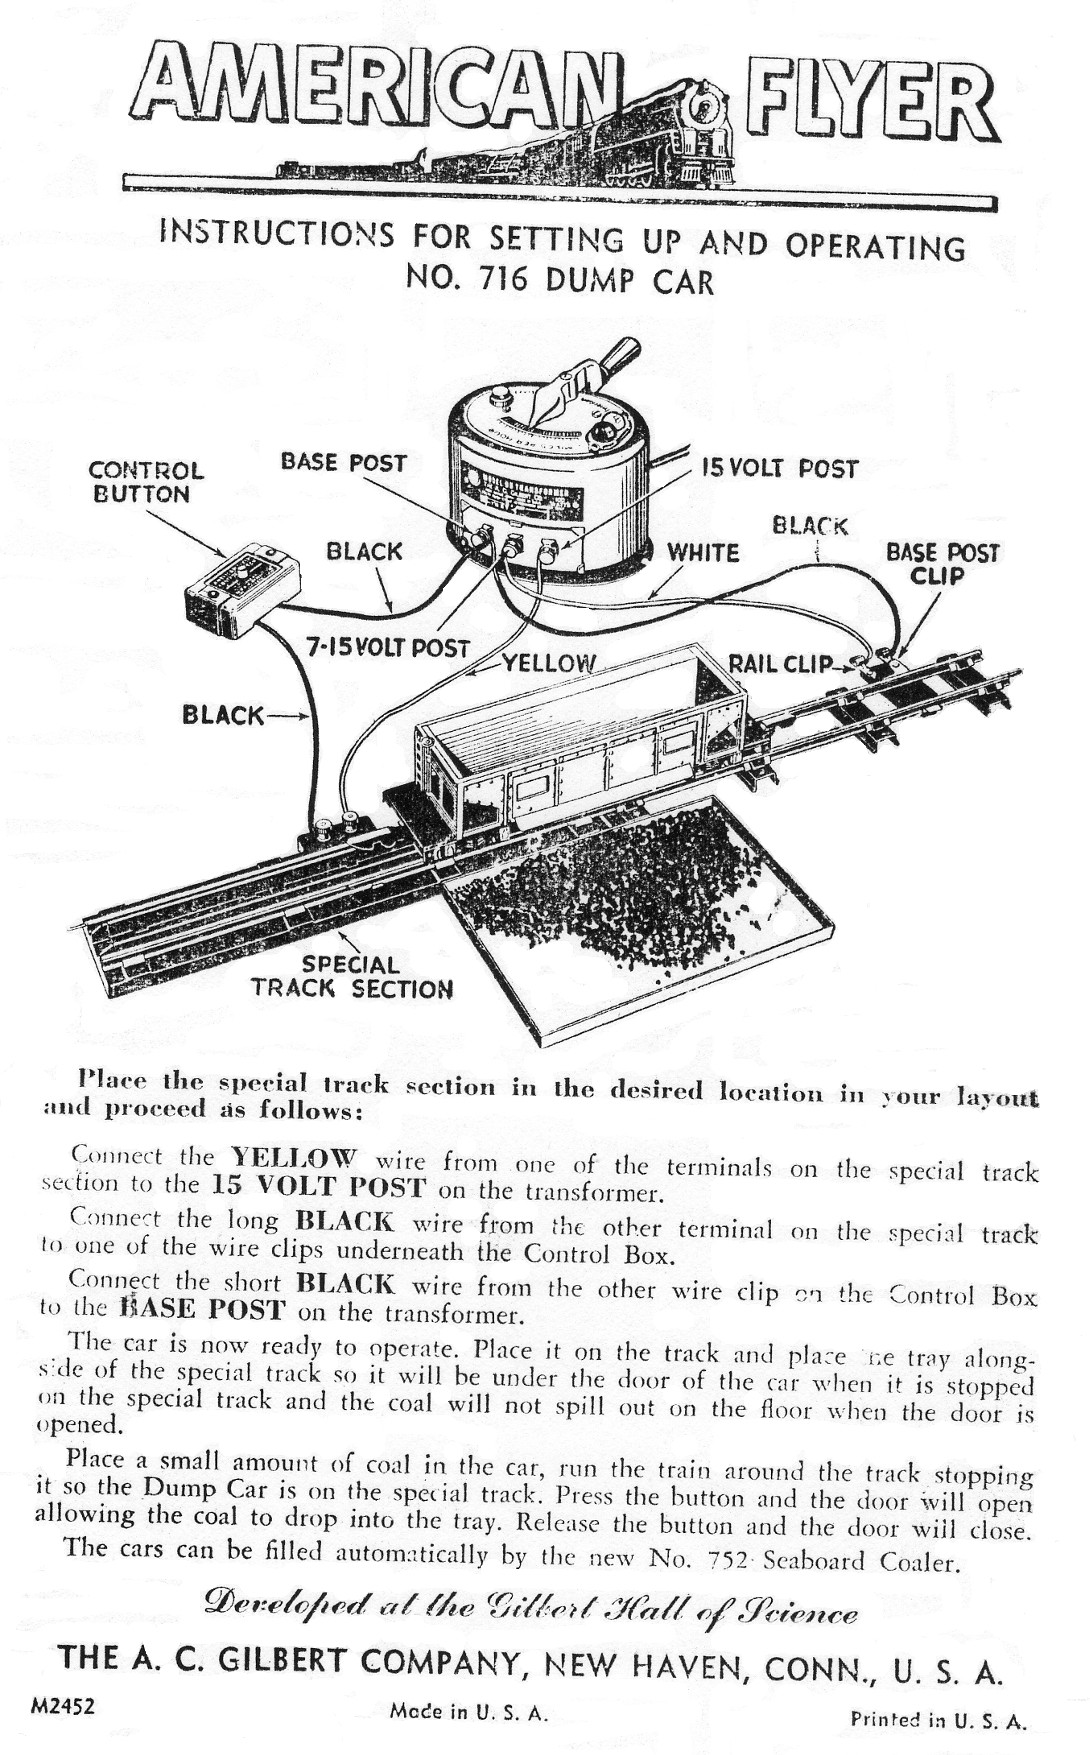 Instructions for Setting Up and Operating No. 716 Coal Dump Car